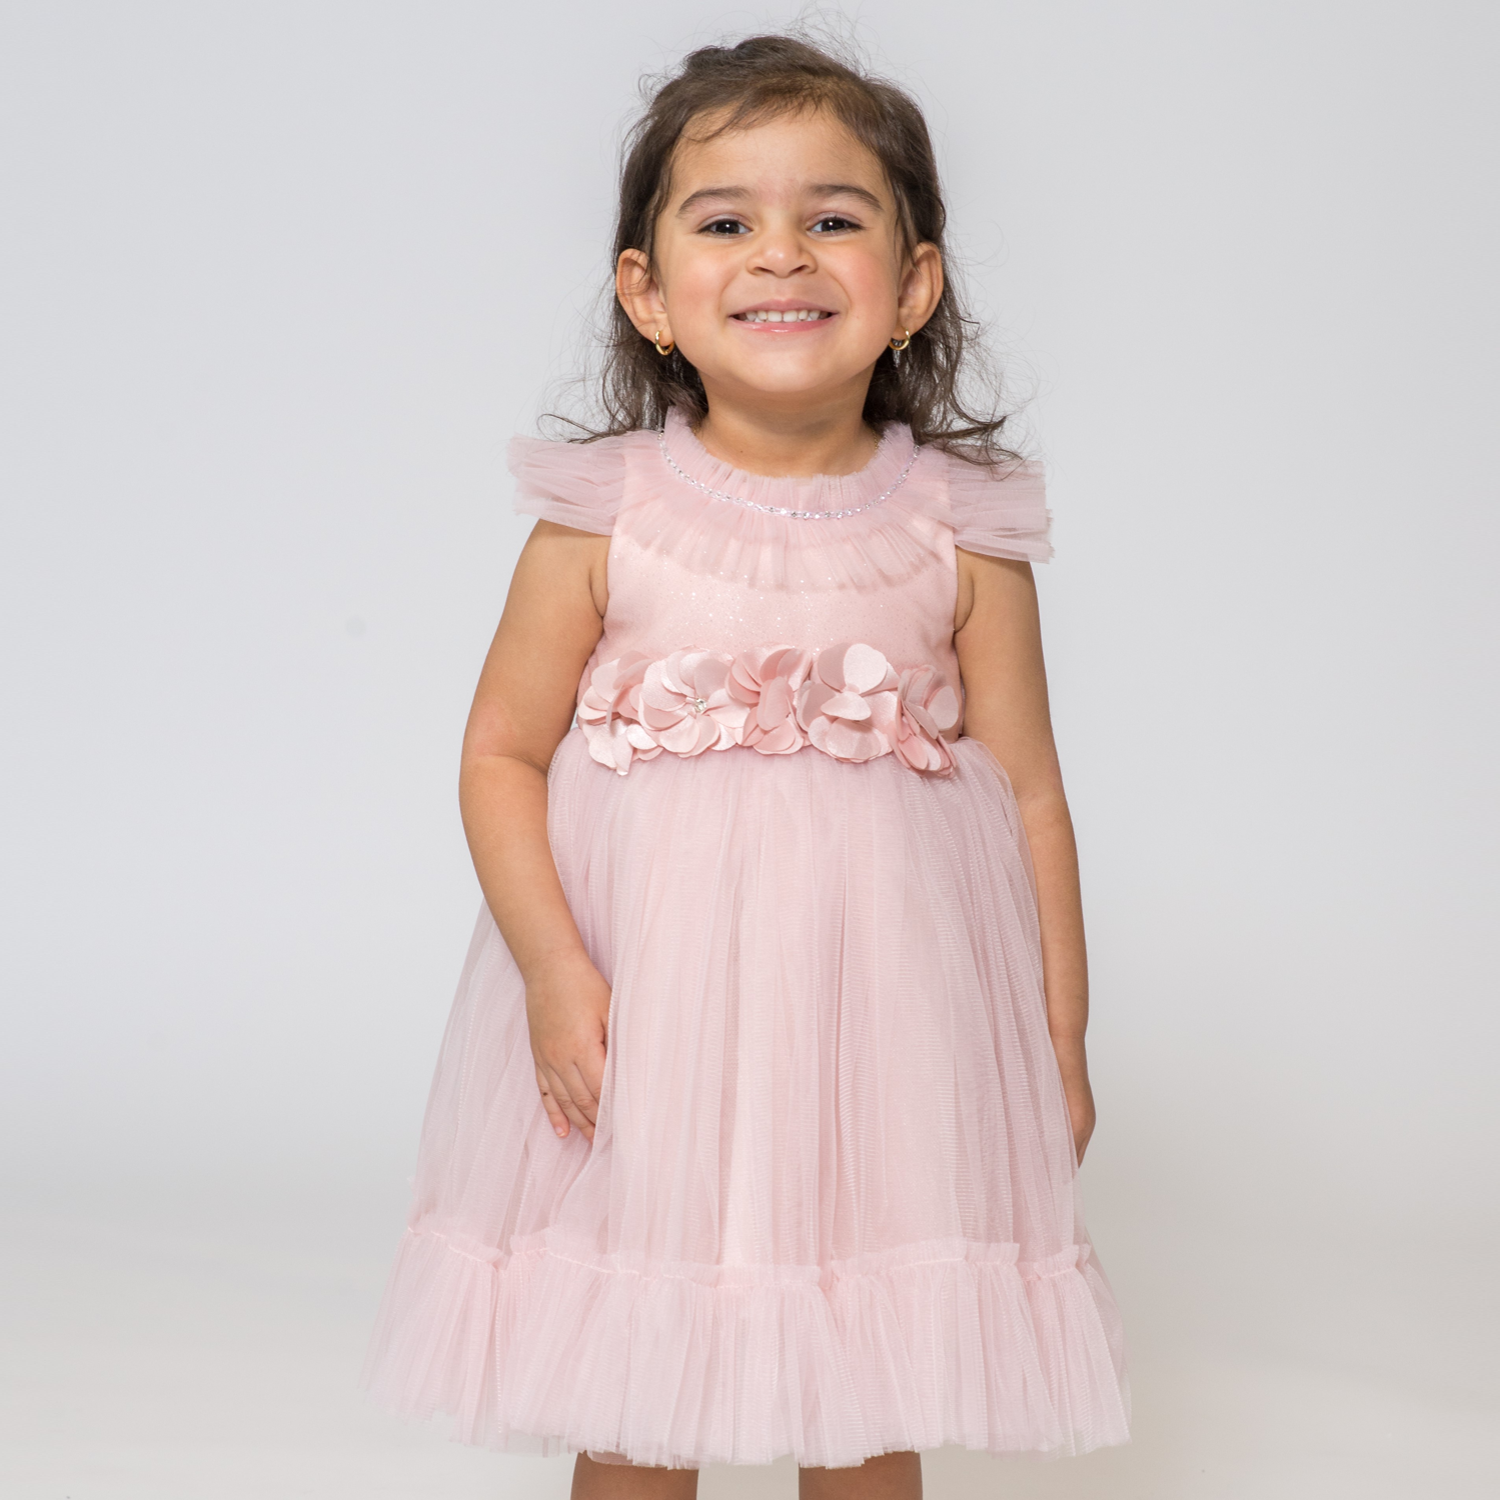 Baby Tania's Tulle Dress